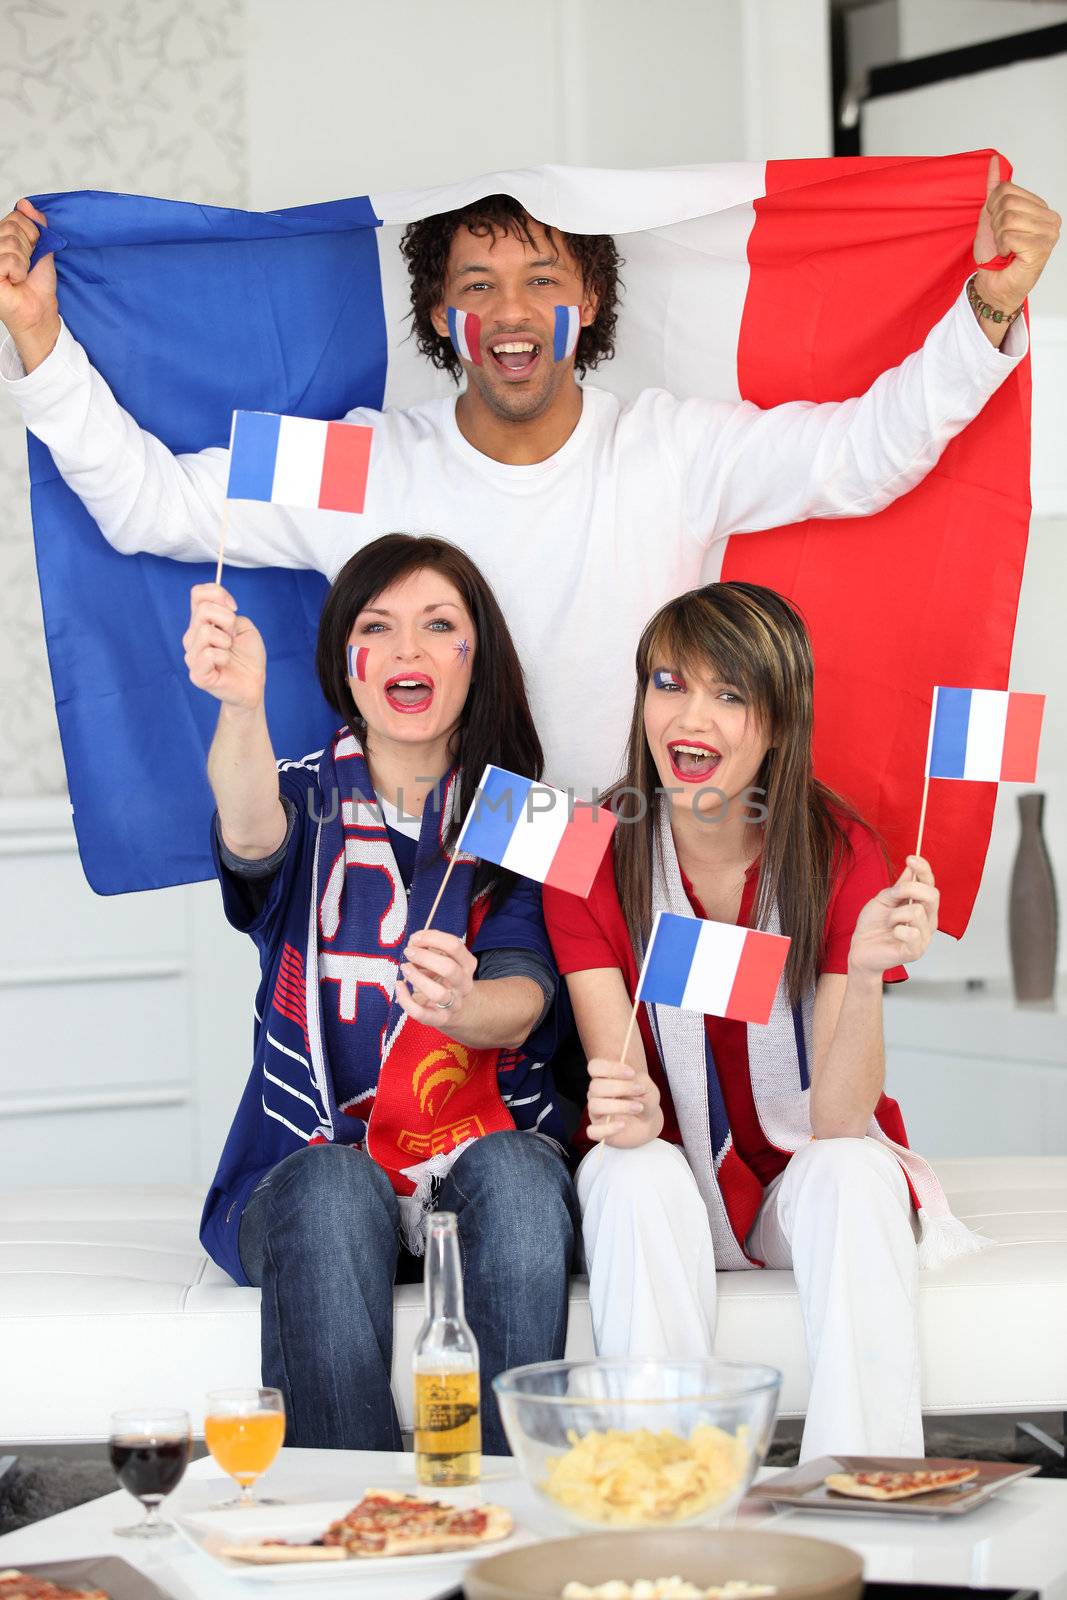 French football fans by phovoir